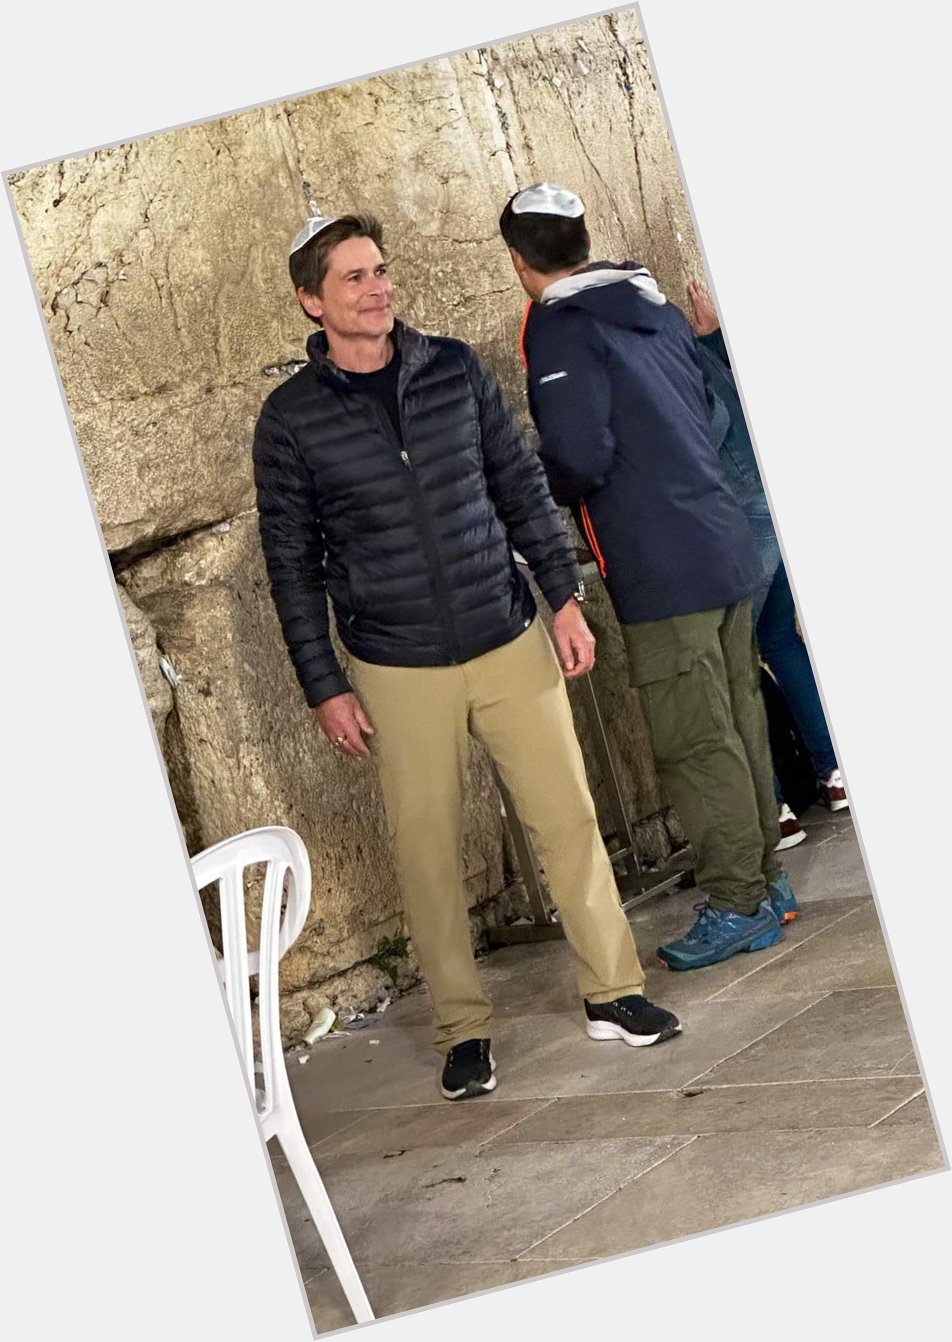 Happy 59th birthday to Rob Lowe, seen here at the Western Wall. 